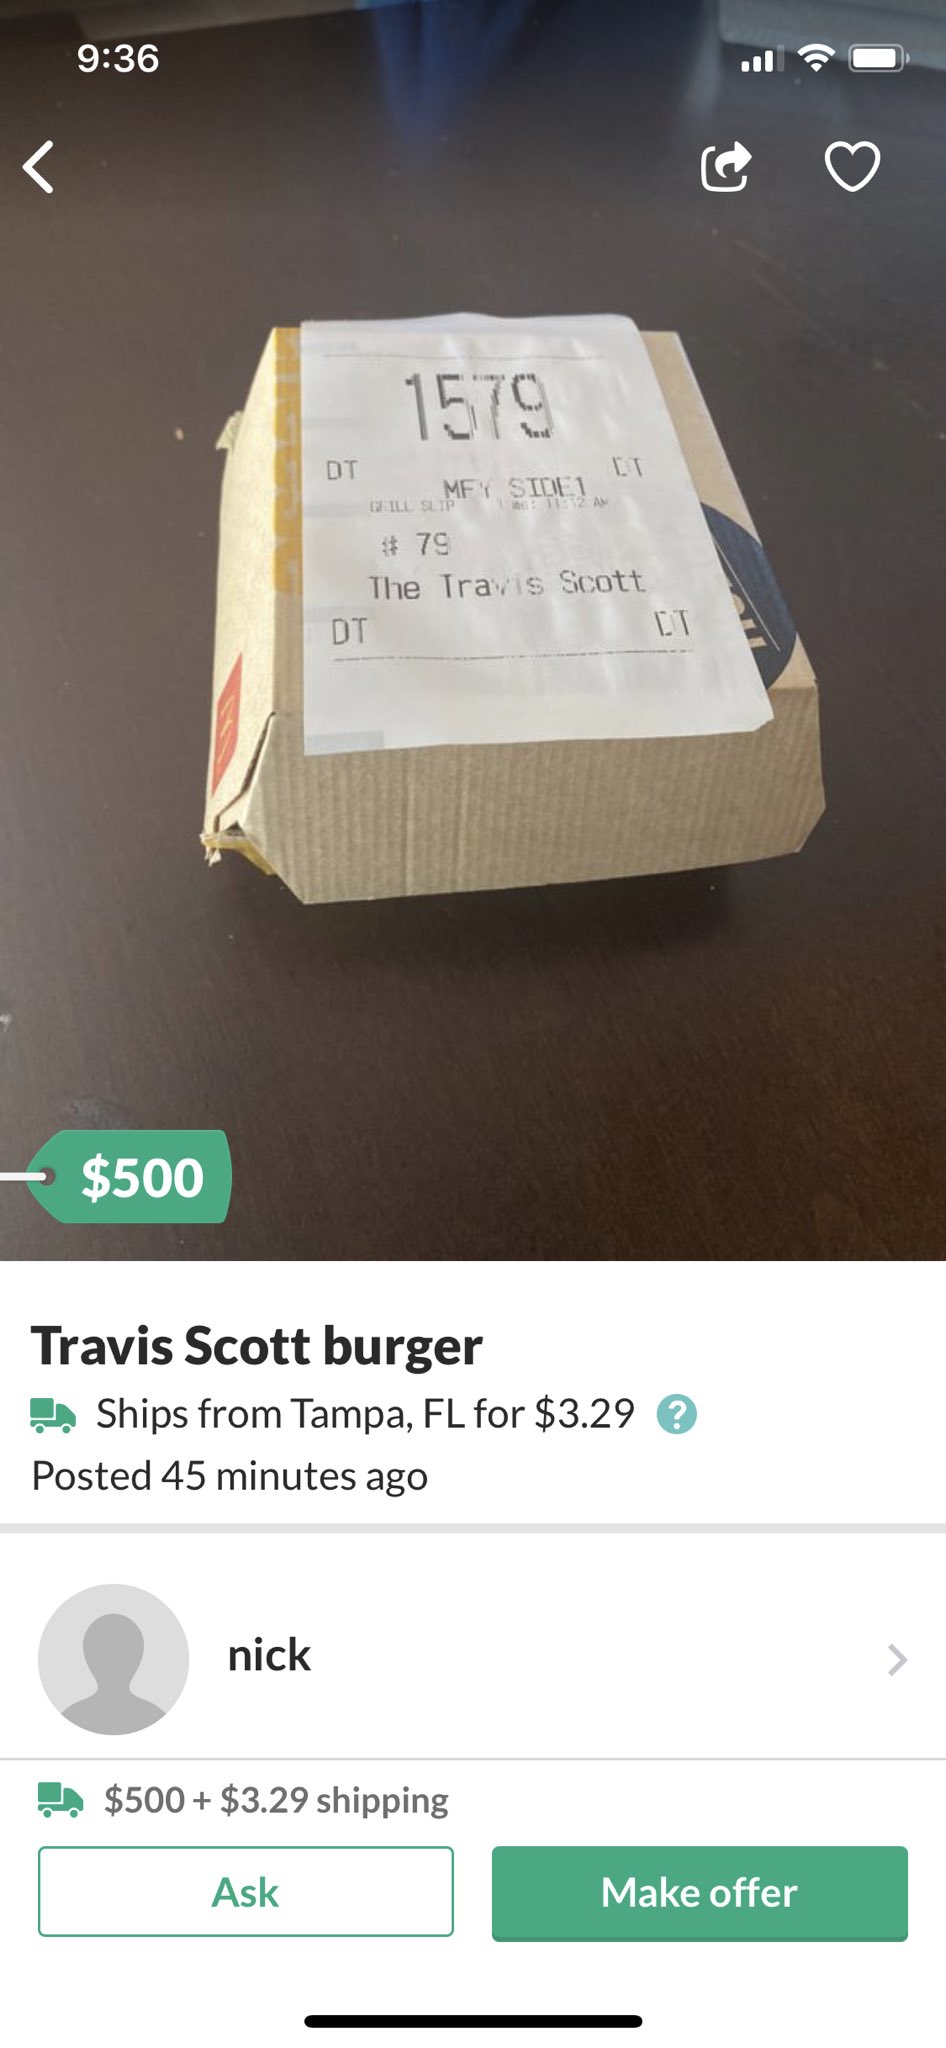 screenshot - 1579 Dt It Mfy Side 1 Grill Slip # 79 The Travis Scott Dt It $500 Travis Scott burger Ships from Tampa, Fl for $3.29 ? Posted 45 minutes ago nick $500 $3.29 shipping Ask Make offer